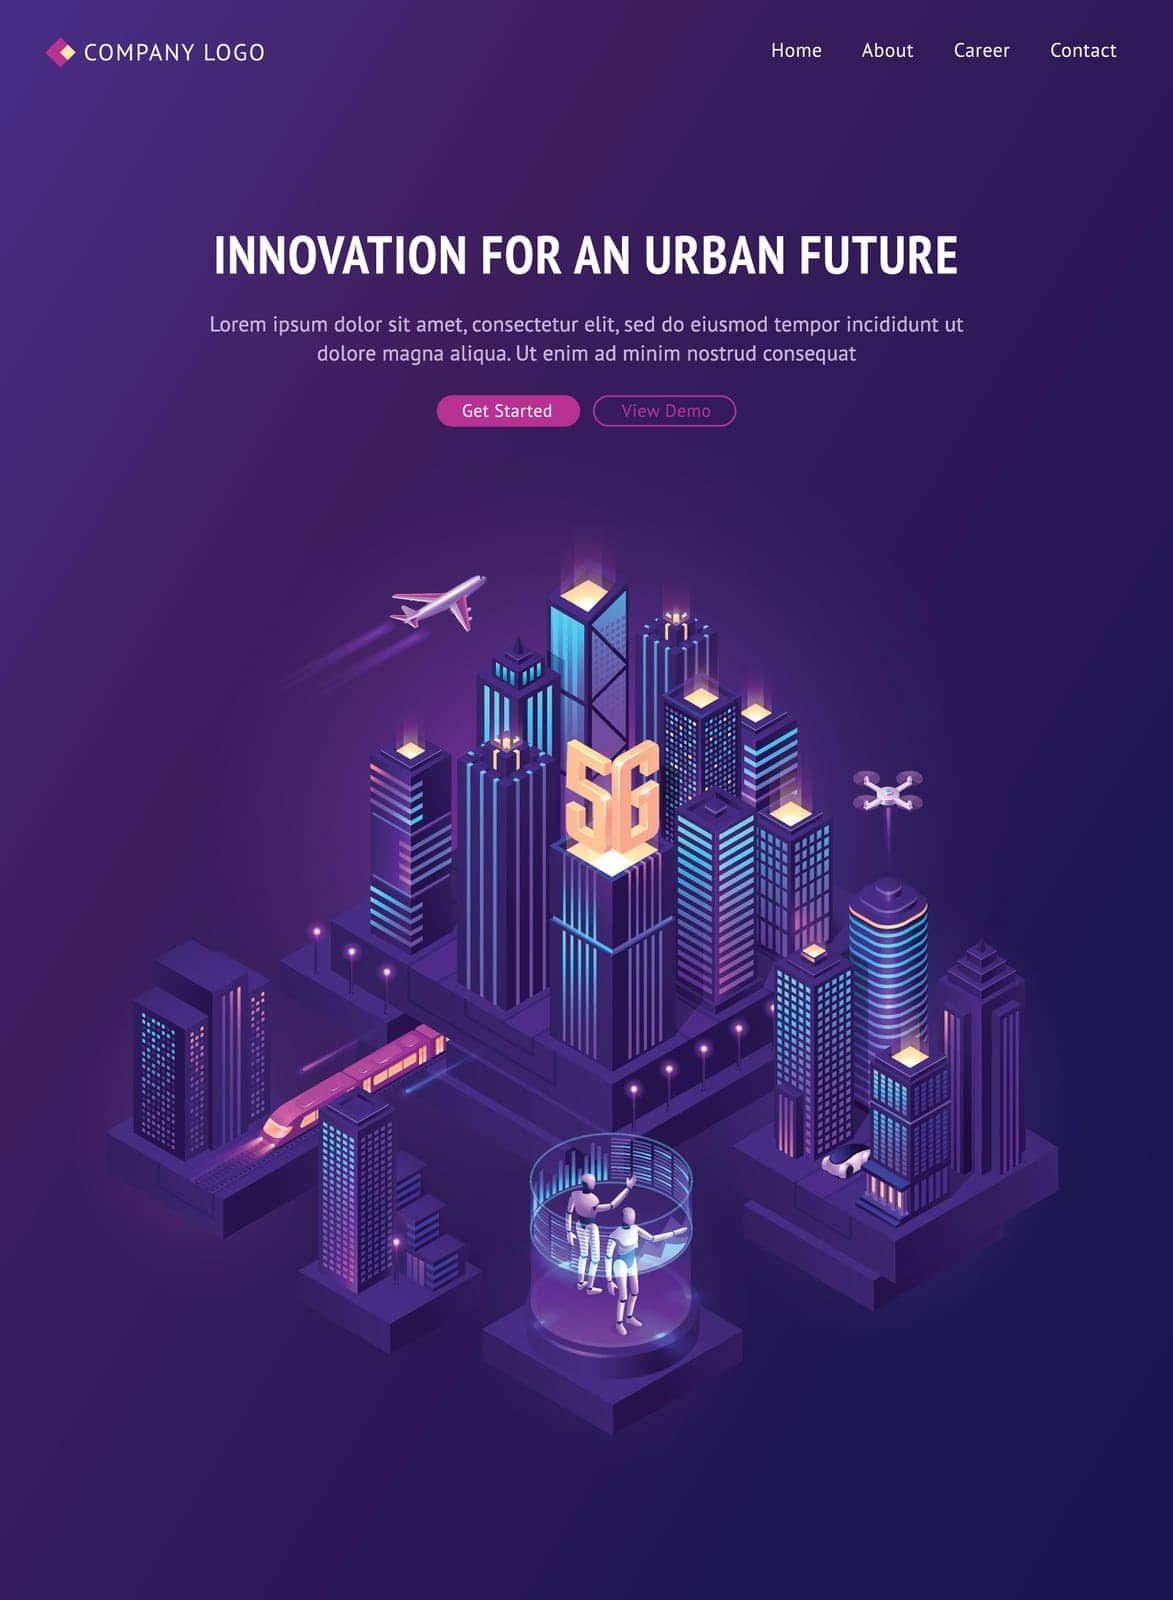 Innovation for urban future isometric landing page. Smart city island with train and airplane transportation, 5g technology and ai robots. Futuristic neon glow smartcity buildings 3d vector web banner